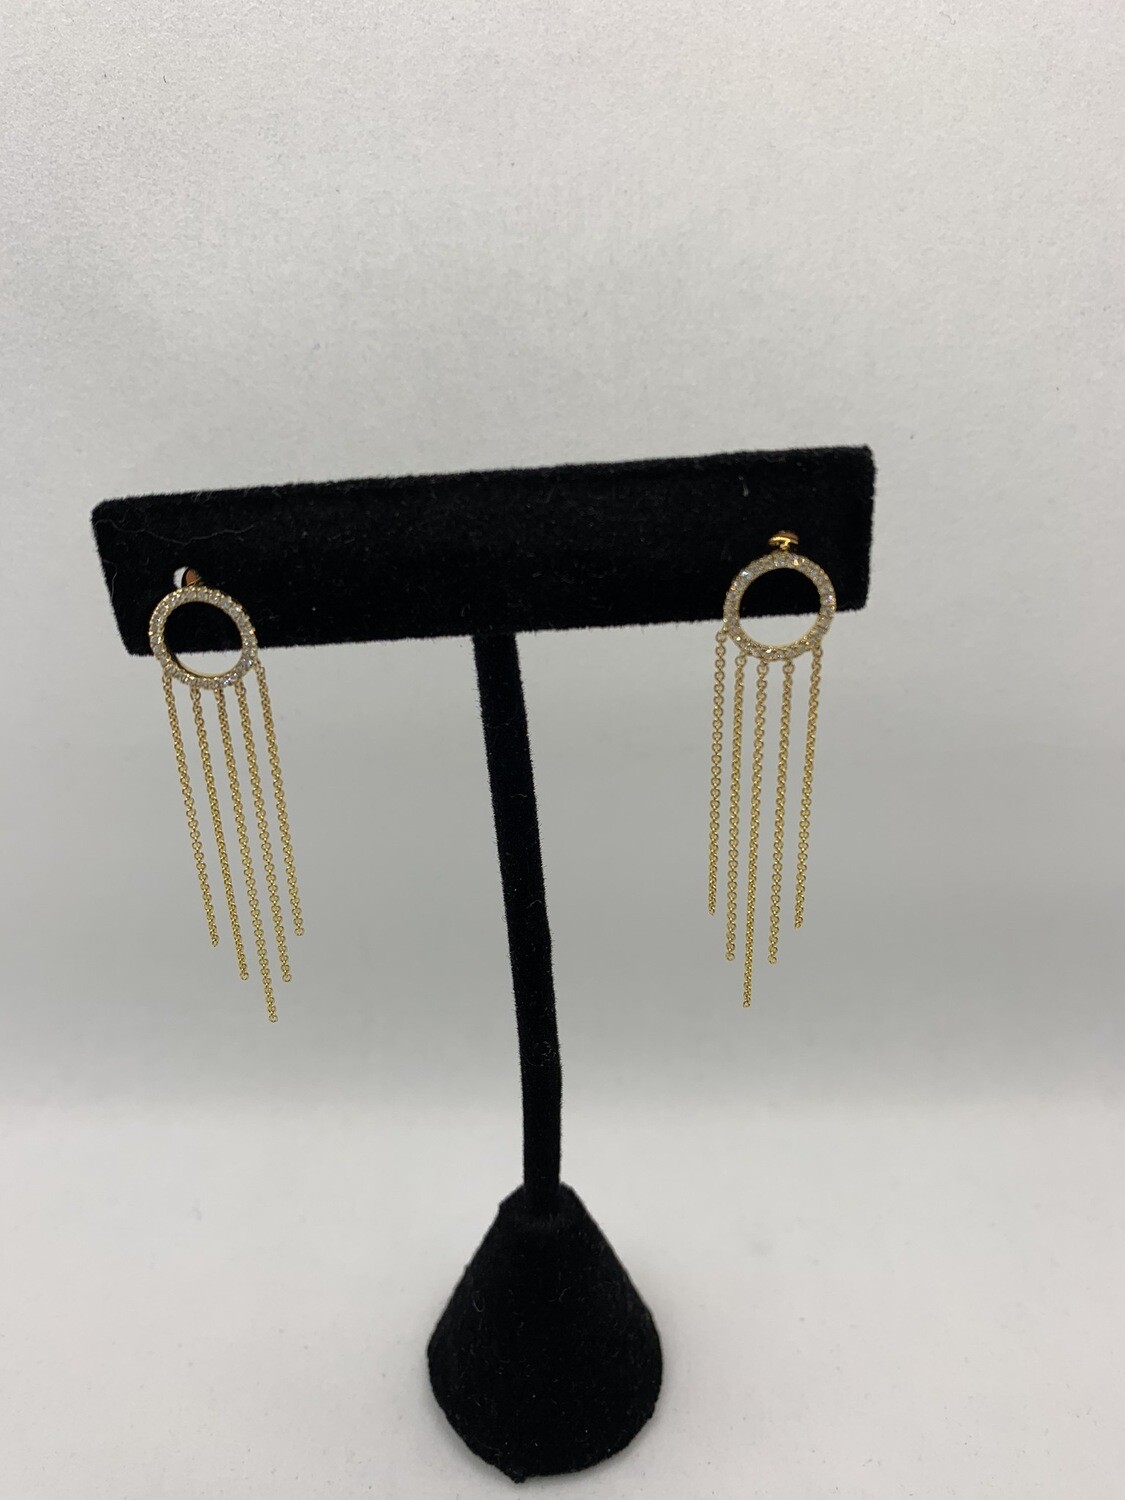 Diamond Dangle Earrings 14 Kt. Yellow Gold .15 Pts. Total Weight